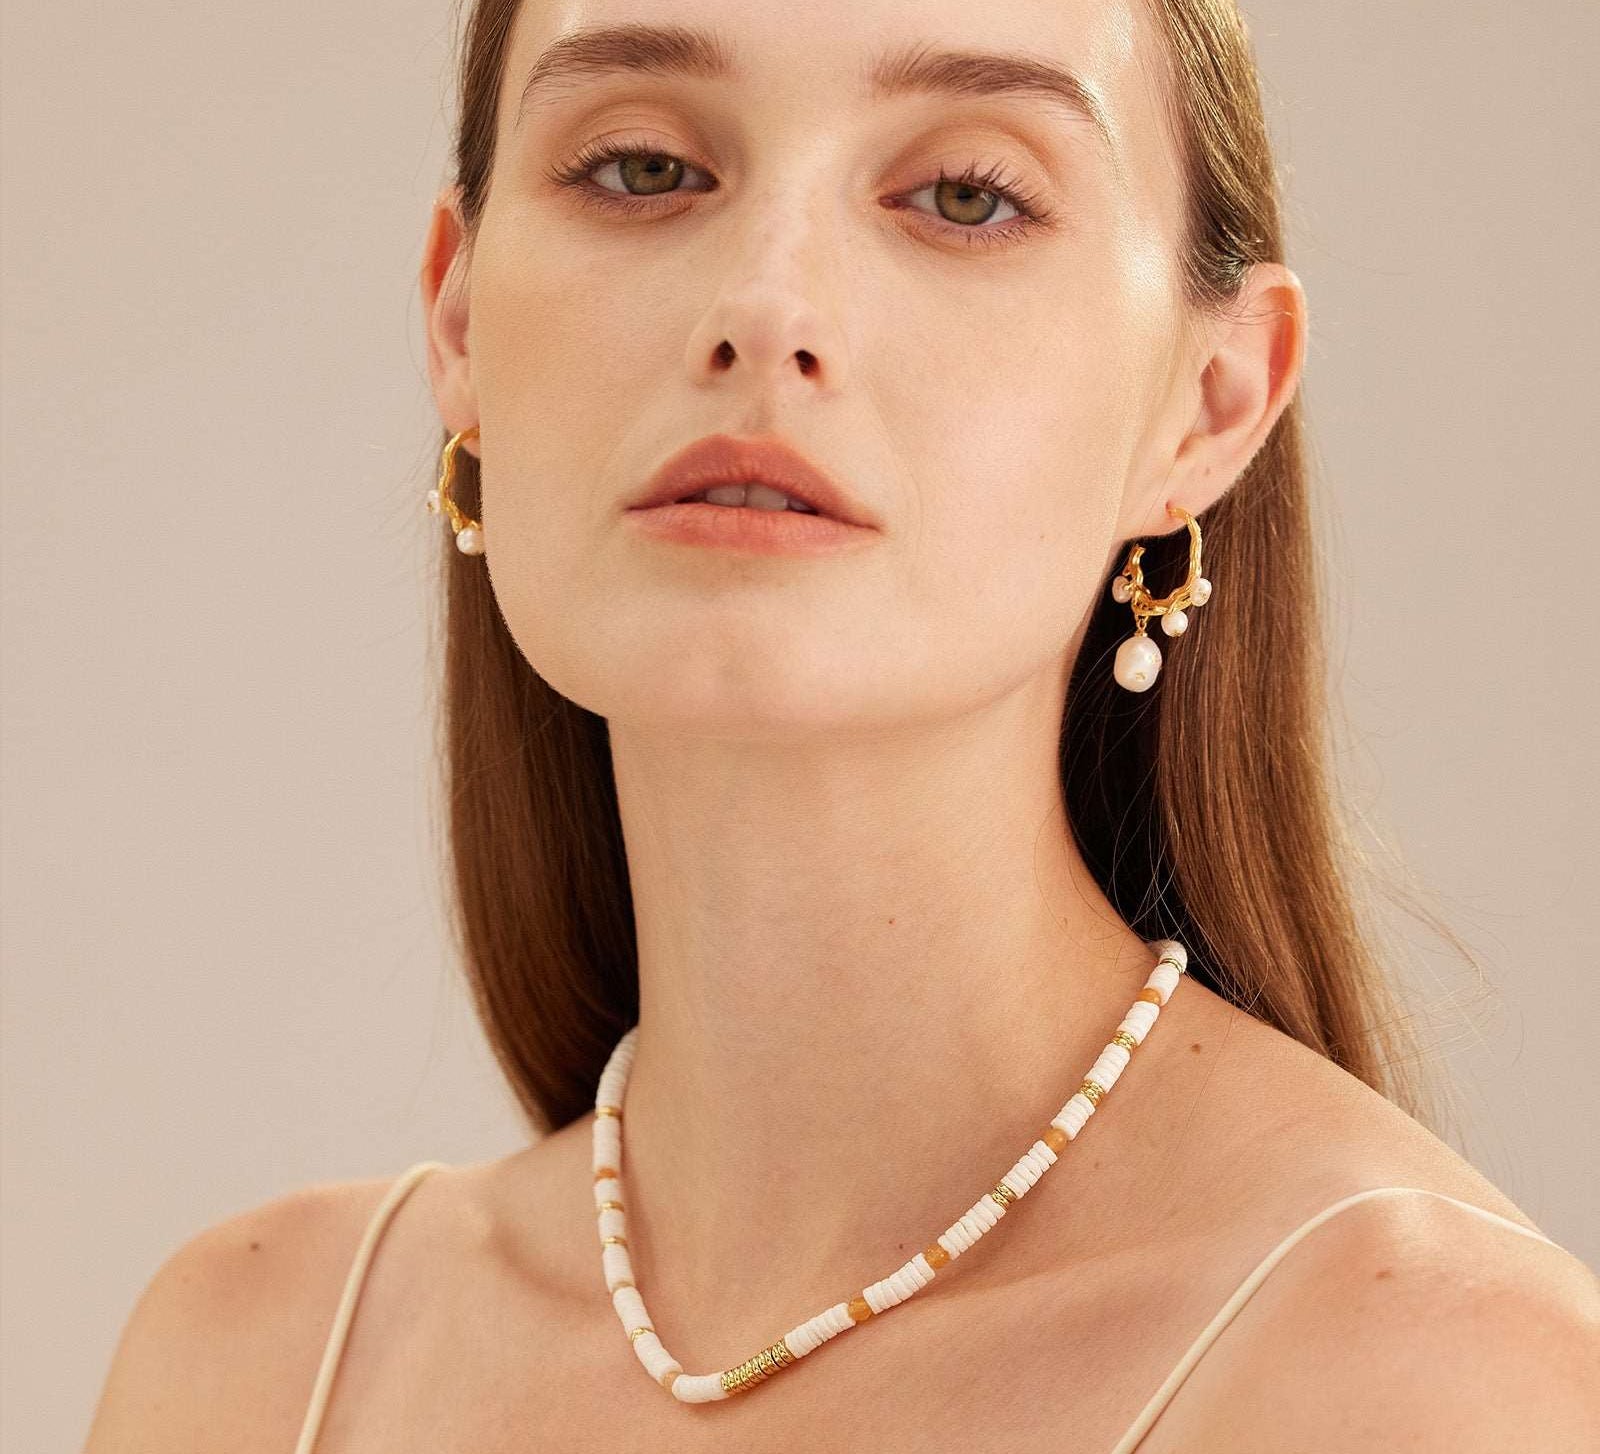 Baroque Pearl Drop Earrings, featuring lustrous baroque pearls as captivating charms, adding a touch of natural beauty and individuality to your ear ensemble